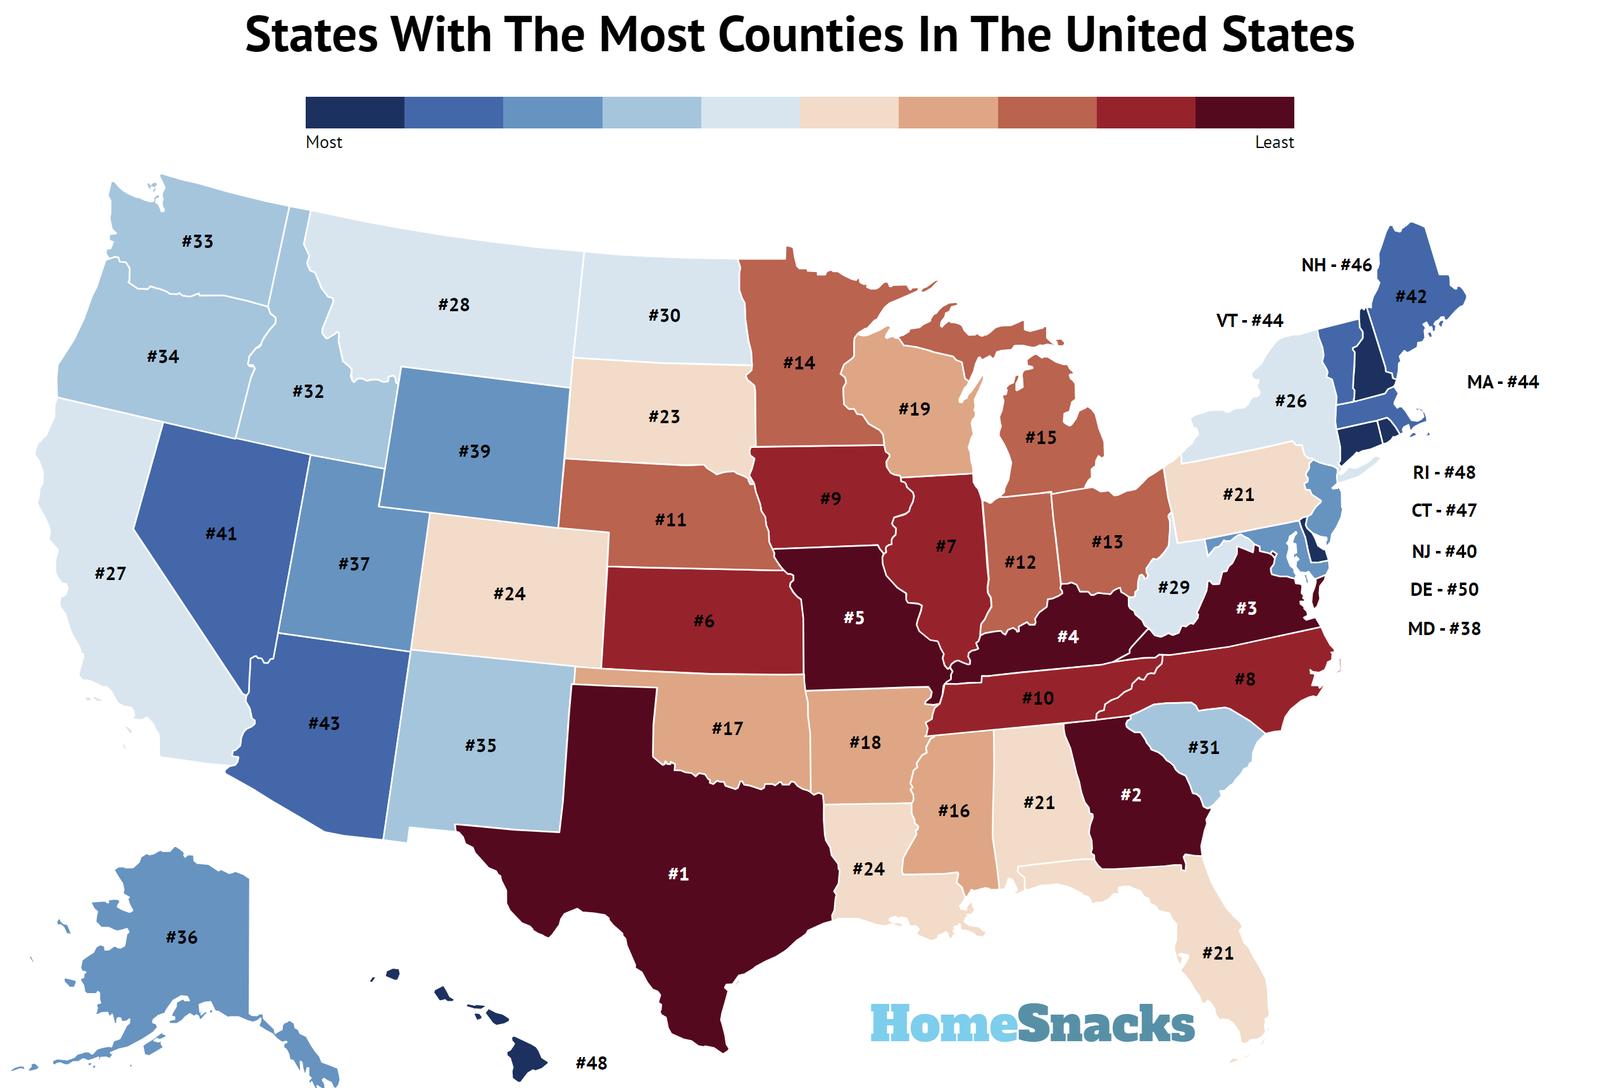 States With The Most Counties In The United States